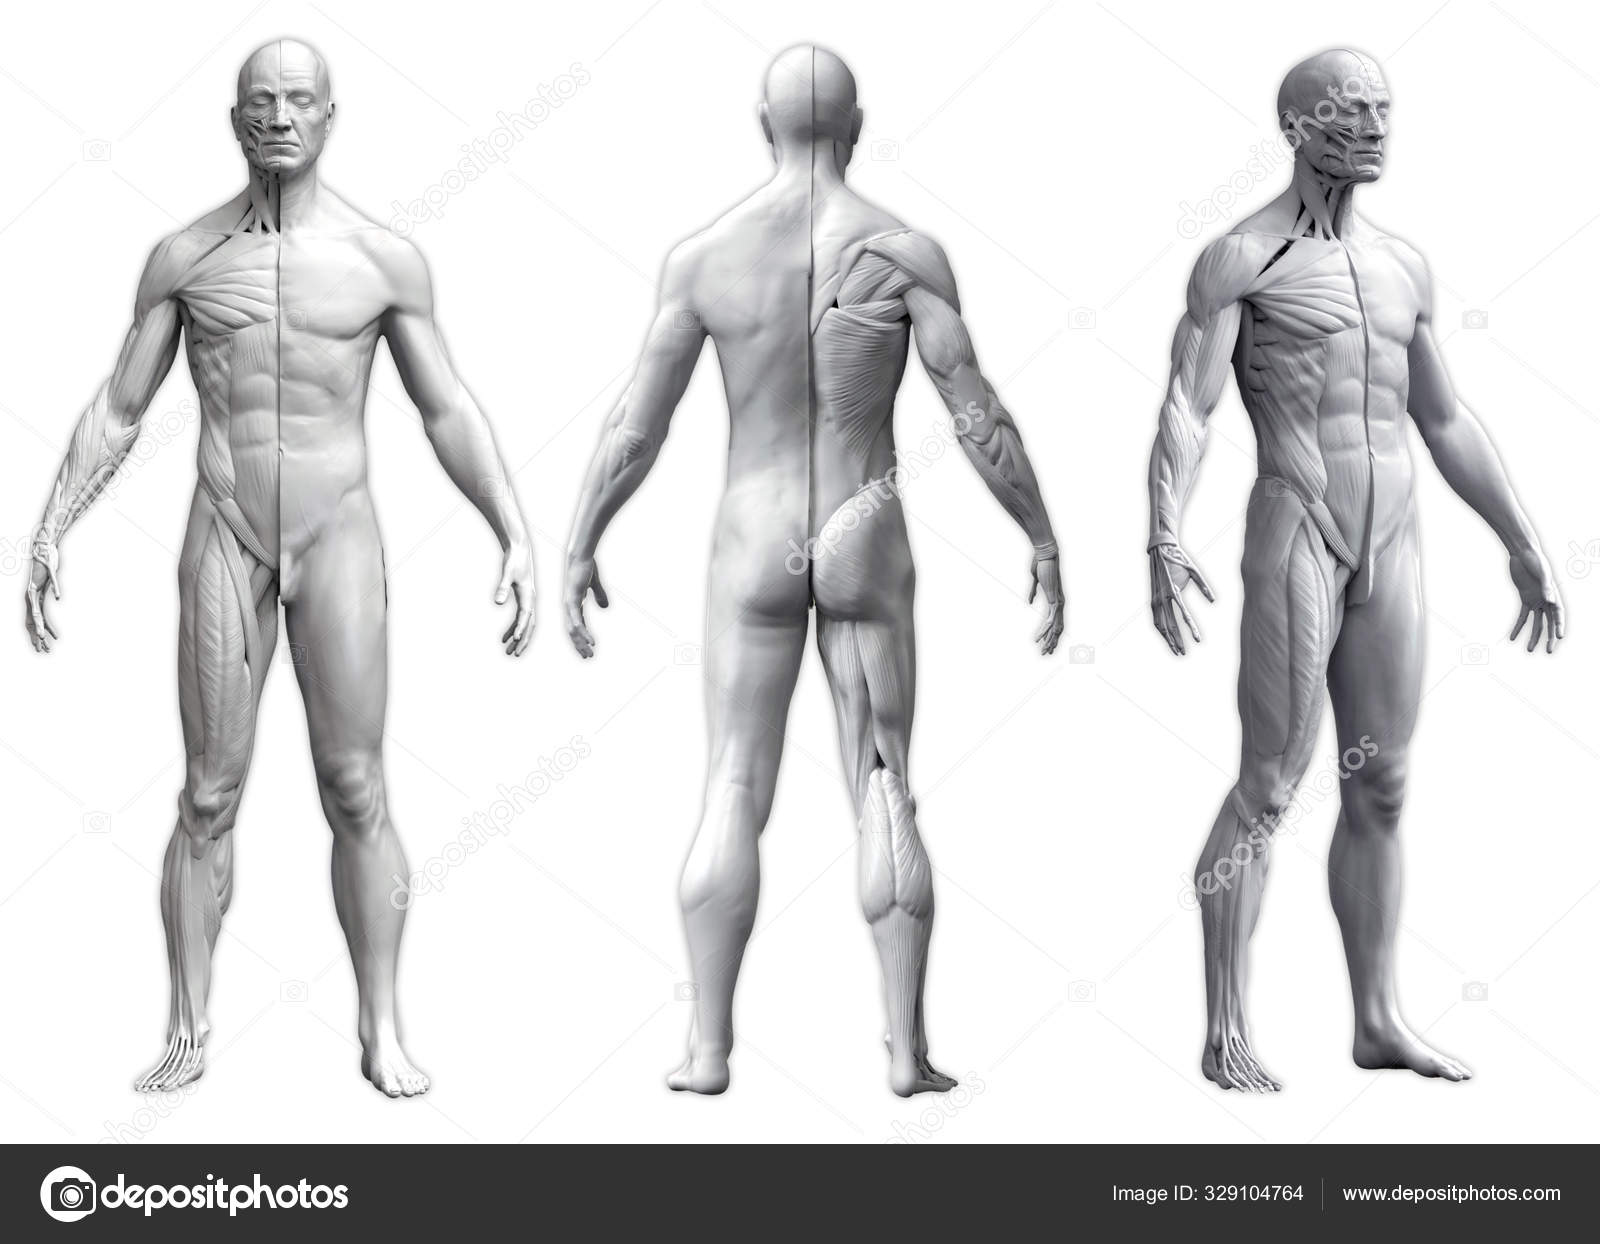 Templates - Humans - Humans - Male Body